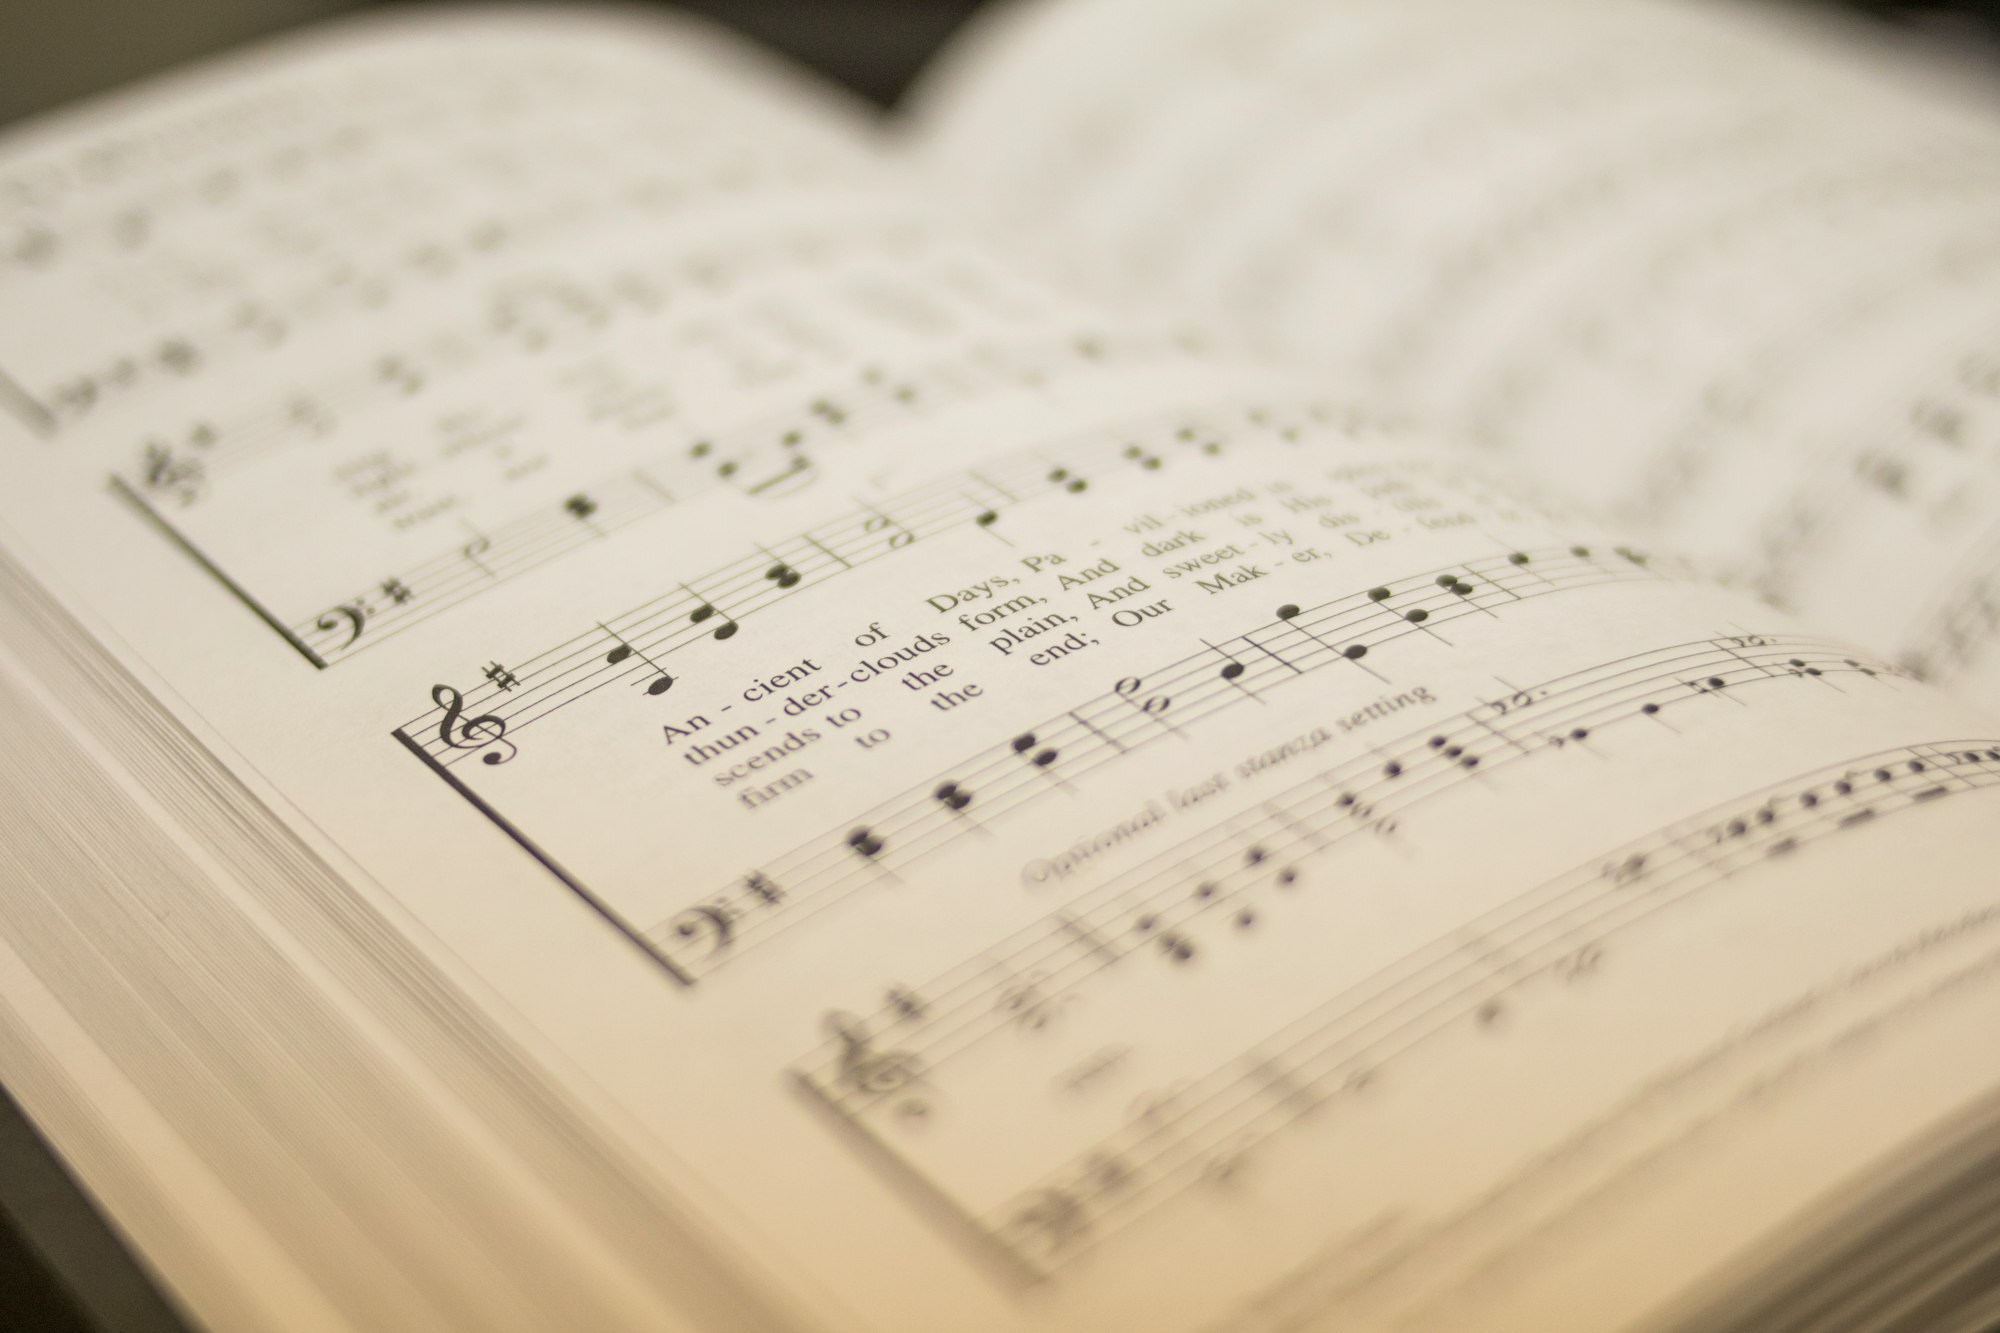 A hymnal open with lyrics and the staff filled with notes.